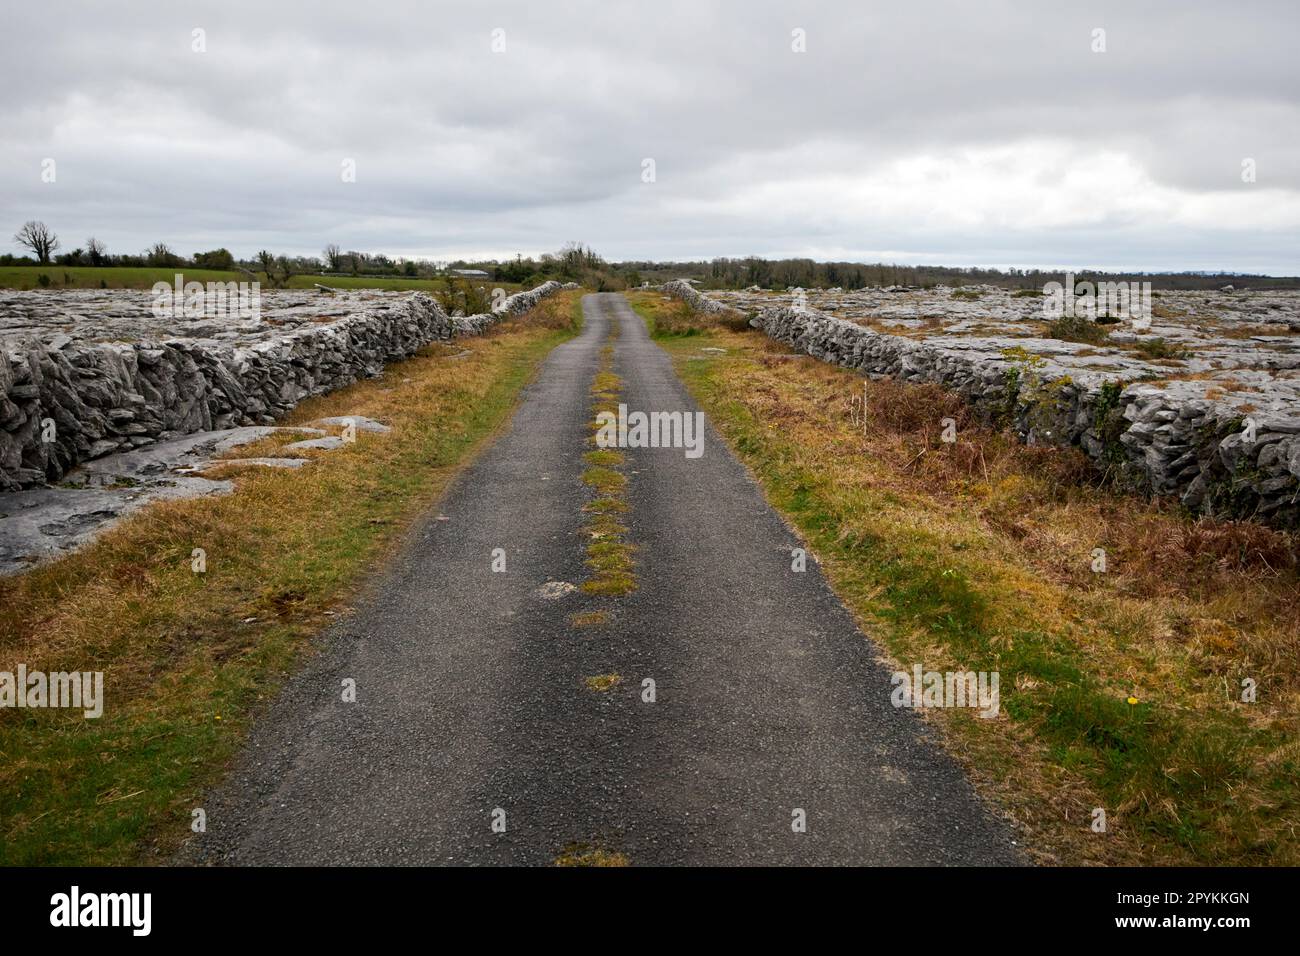 small country road bounded by dry stone walls through the burren county clare republic of ireland Stock Photo